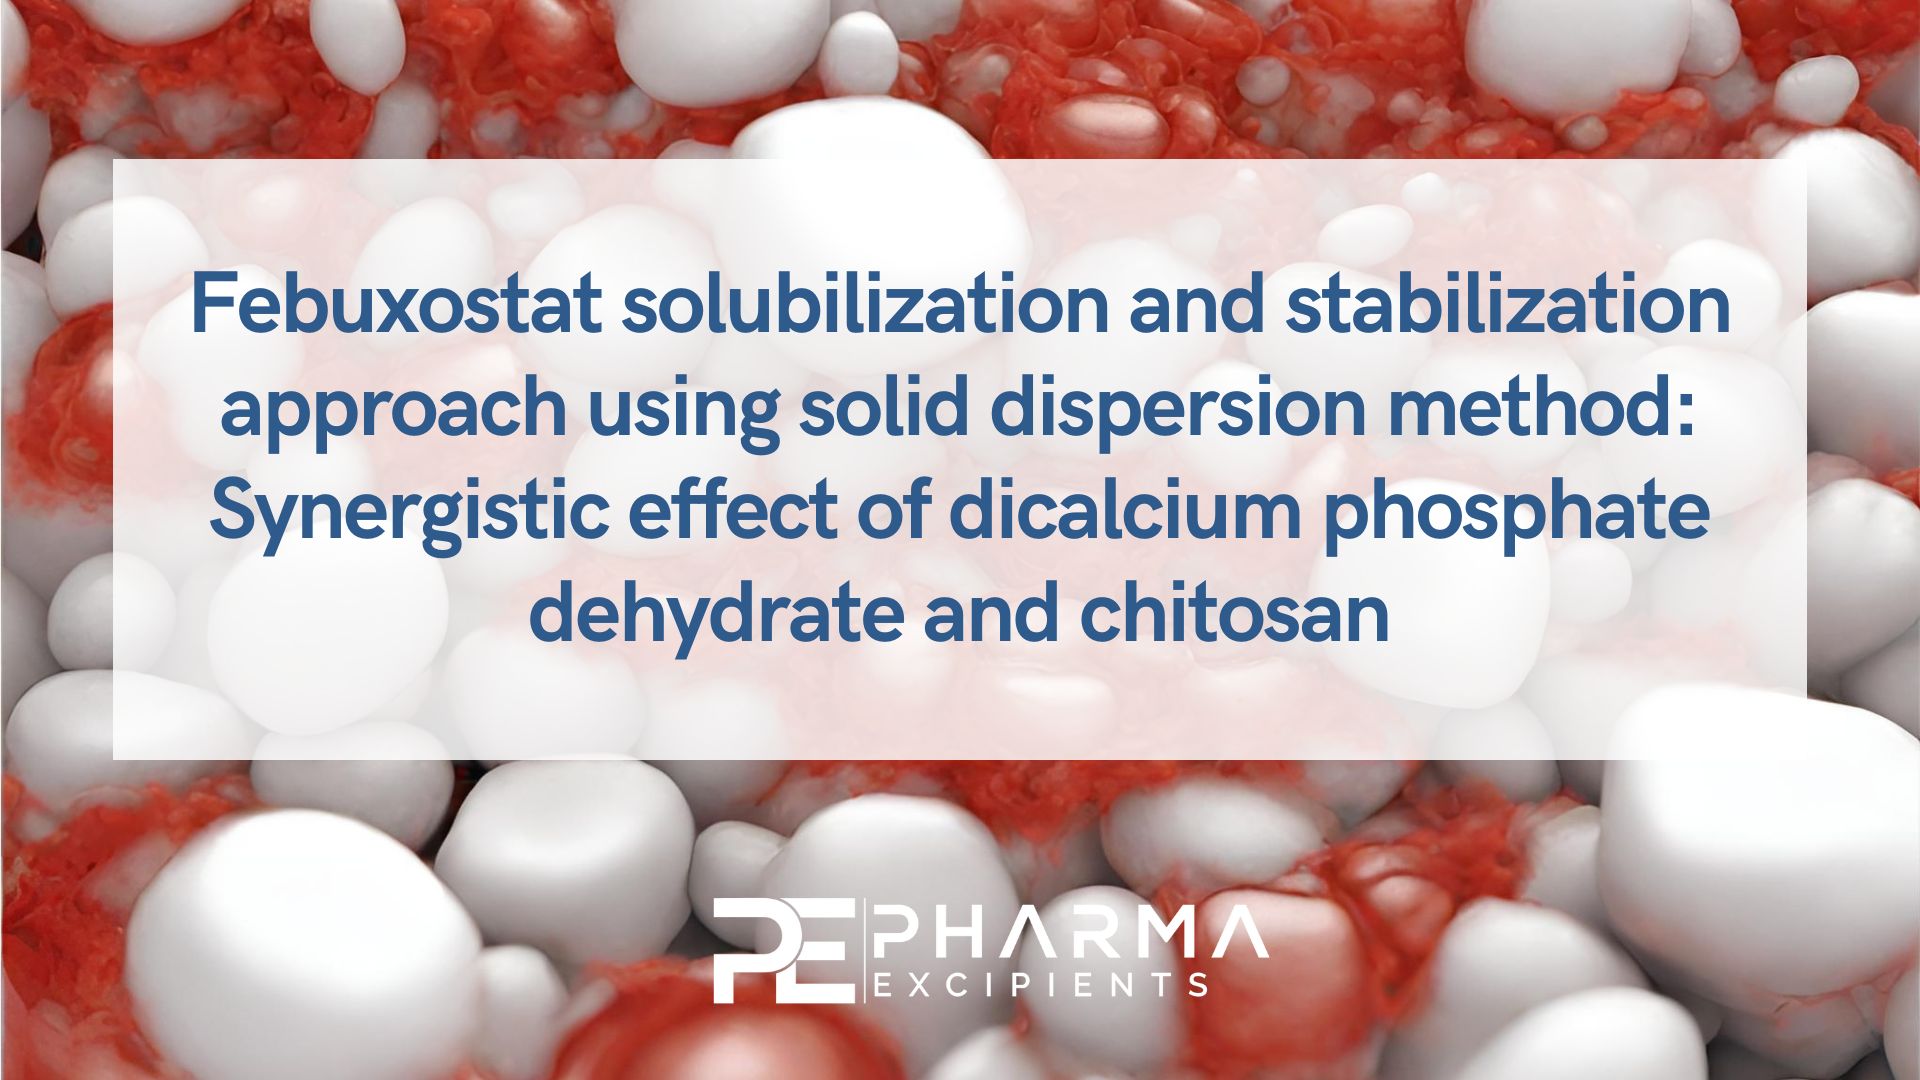 Febuxostat solubilization and stabilization approach using solid dispersion method: Synergistic effect of dicalcium phosphate dehydrate and chitosan